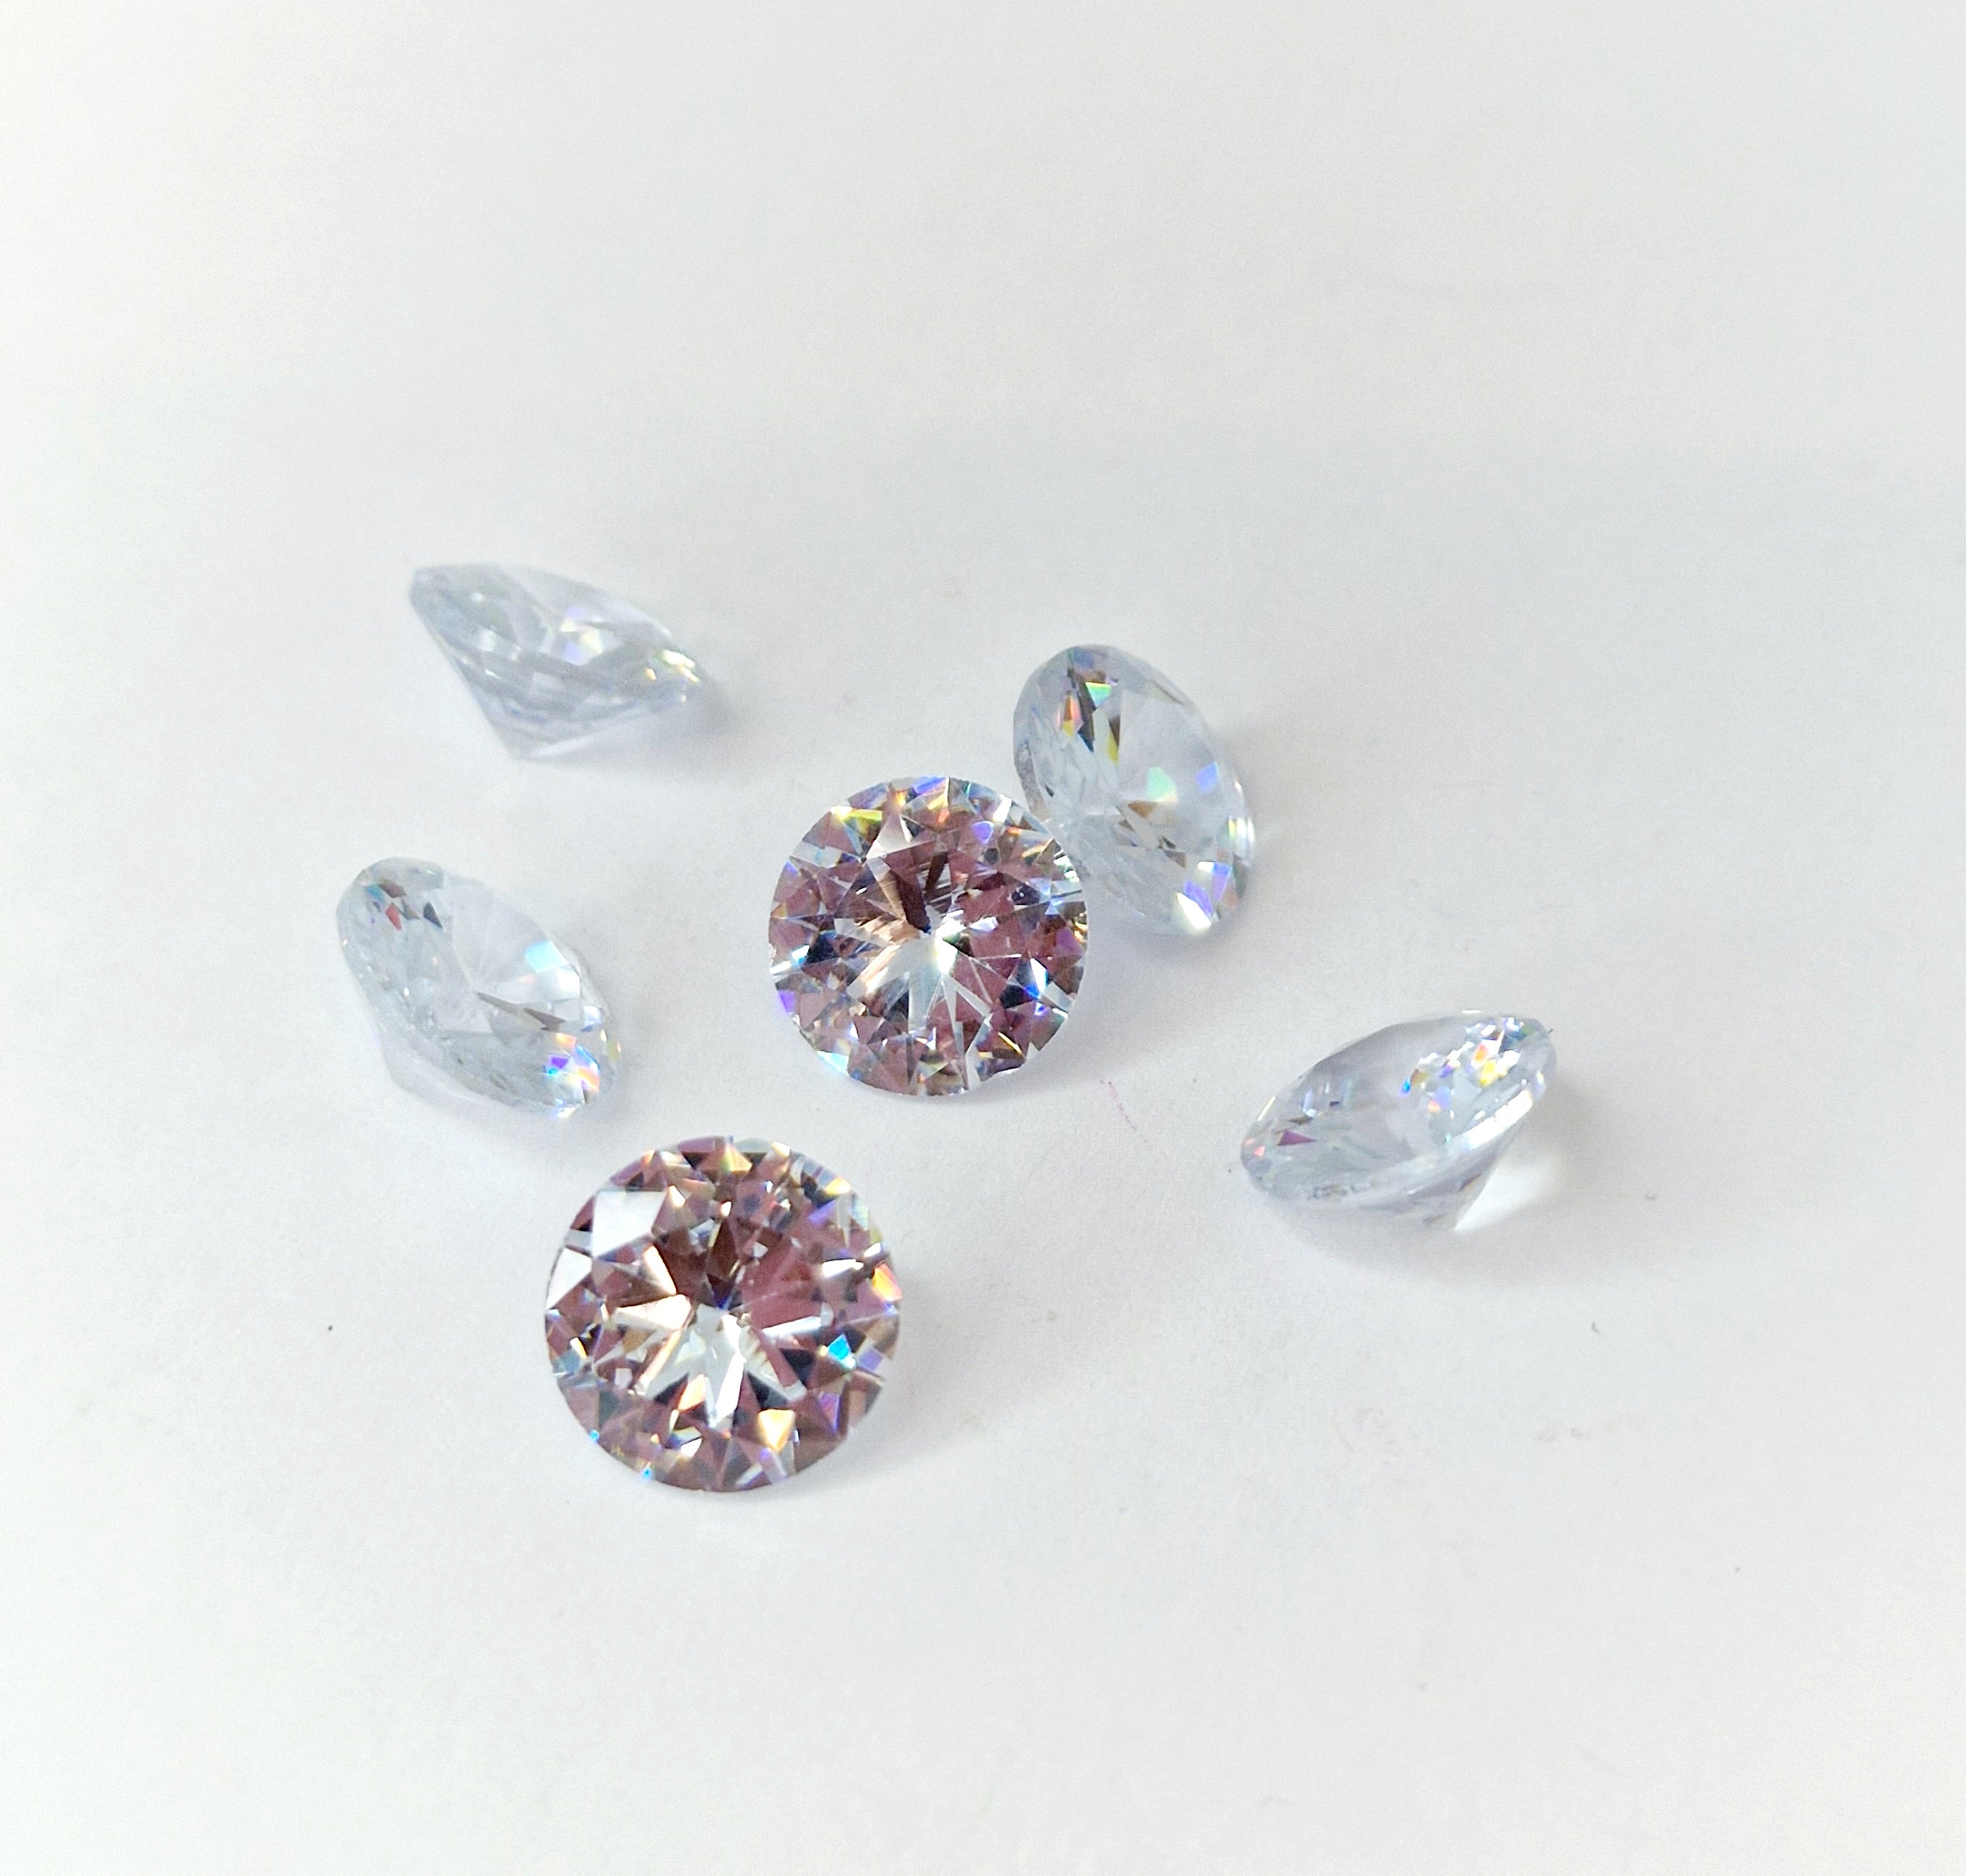 MajorCrafts 6pcs 10mm AAAAA (5A) Crystal Clear Round Point Back Cubic Zirconia Stones